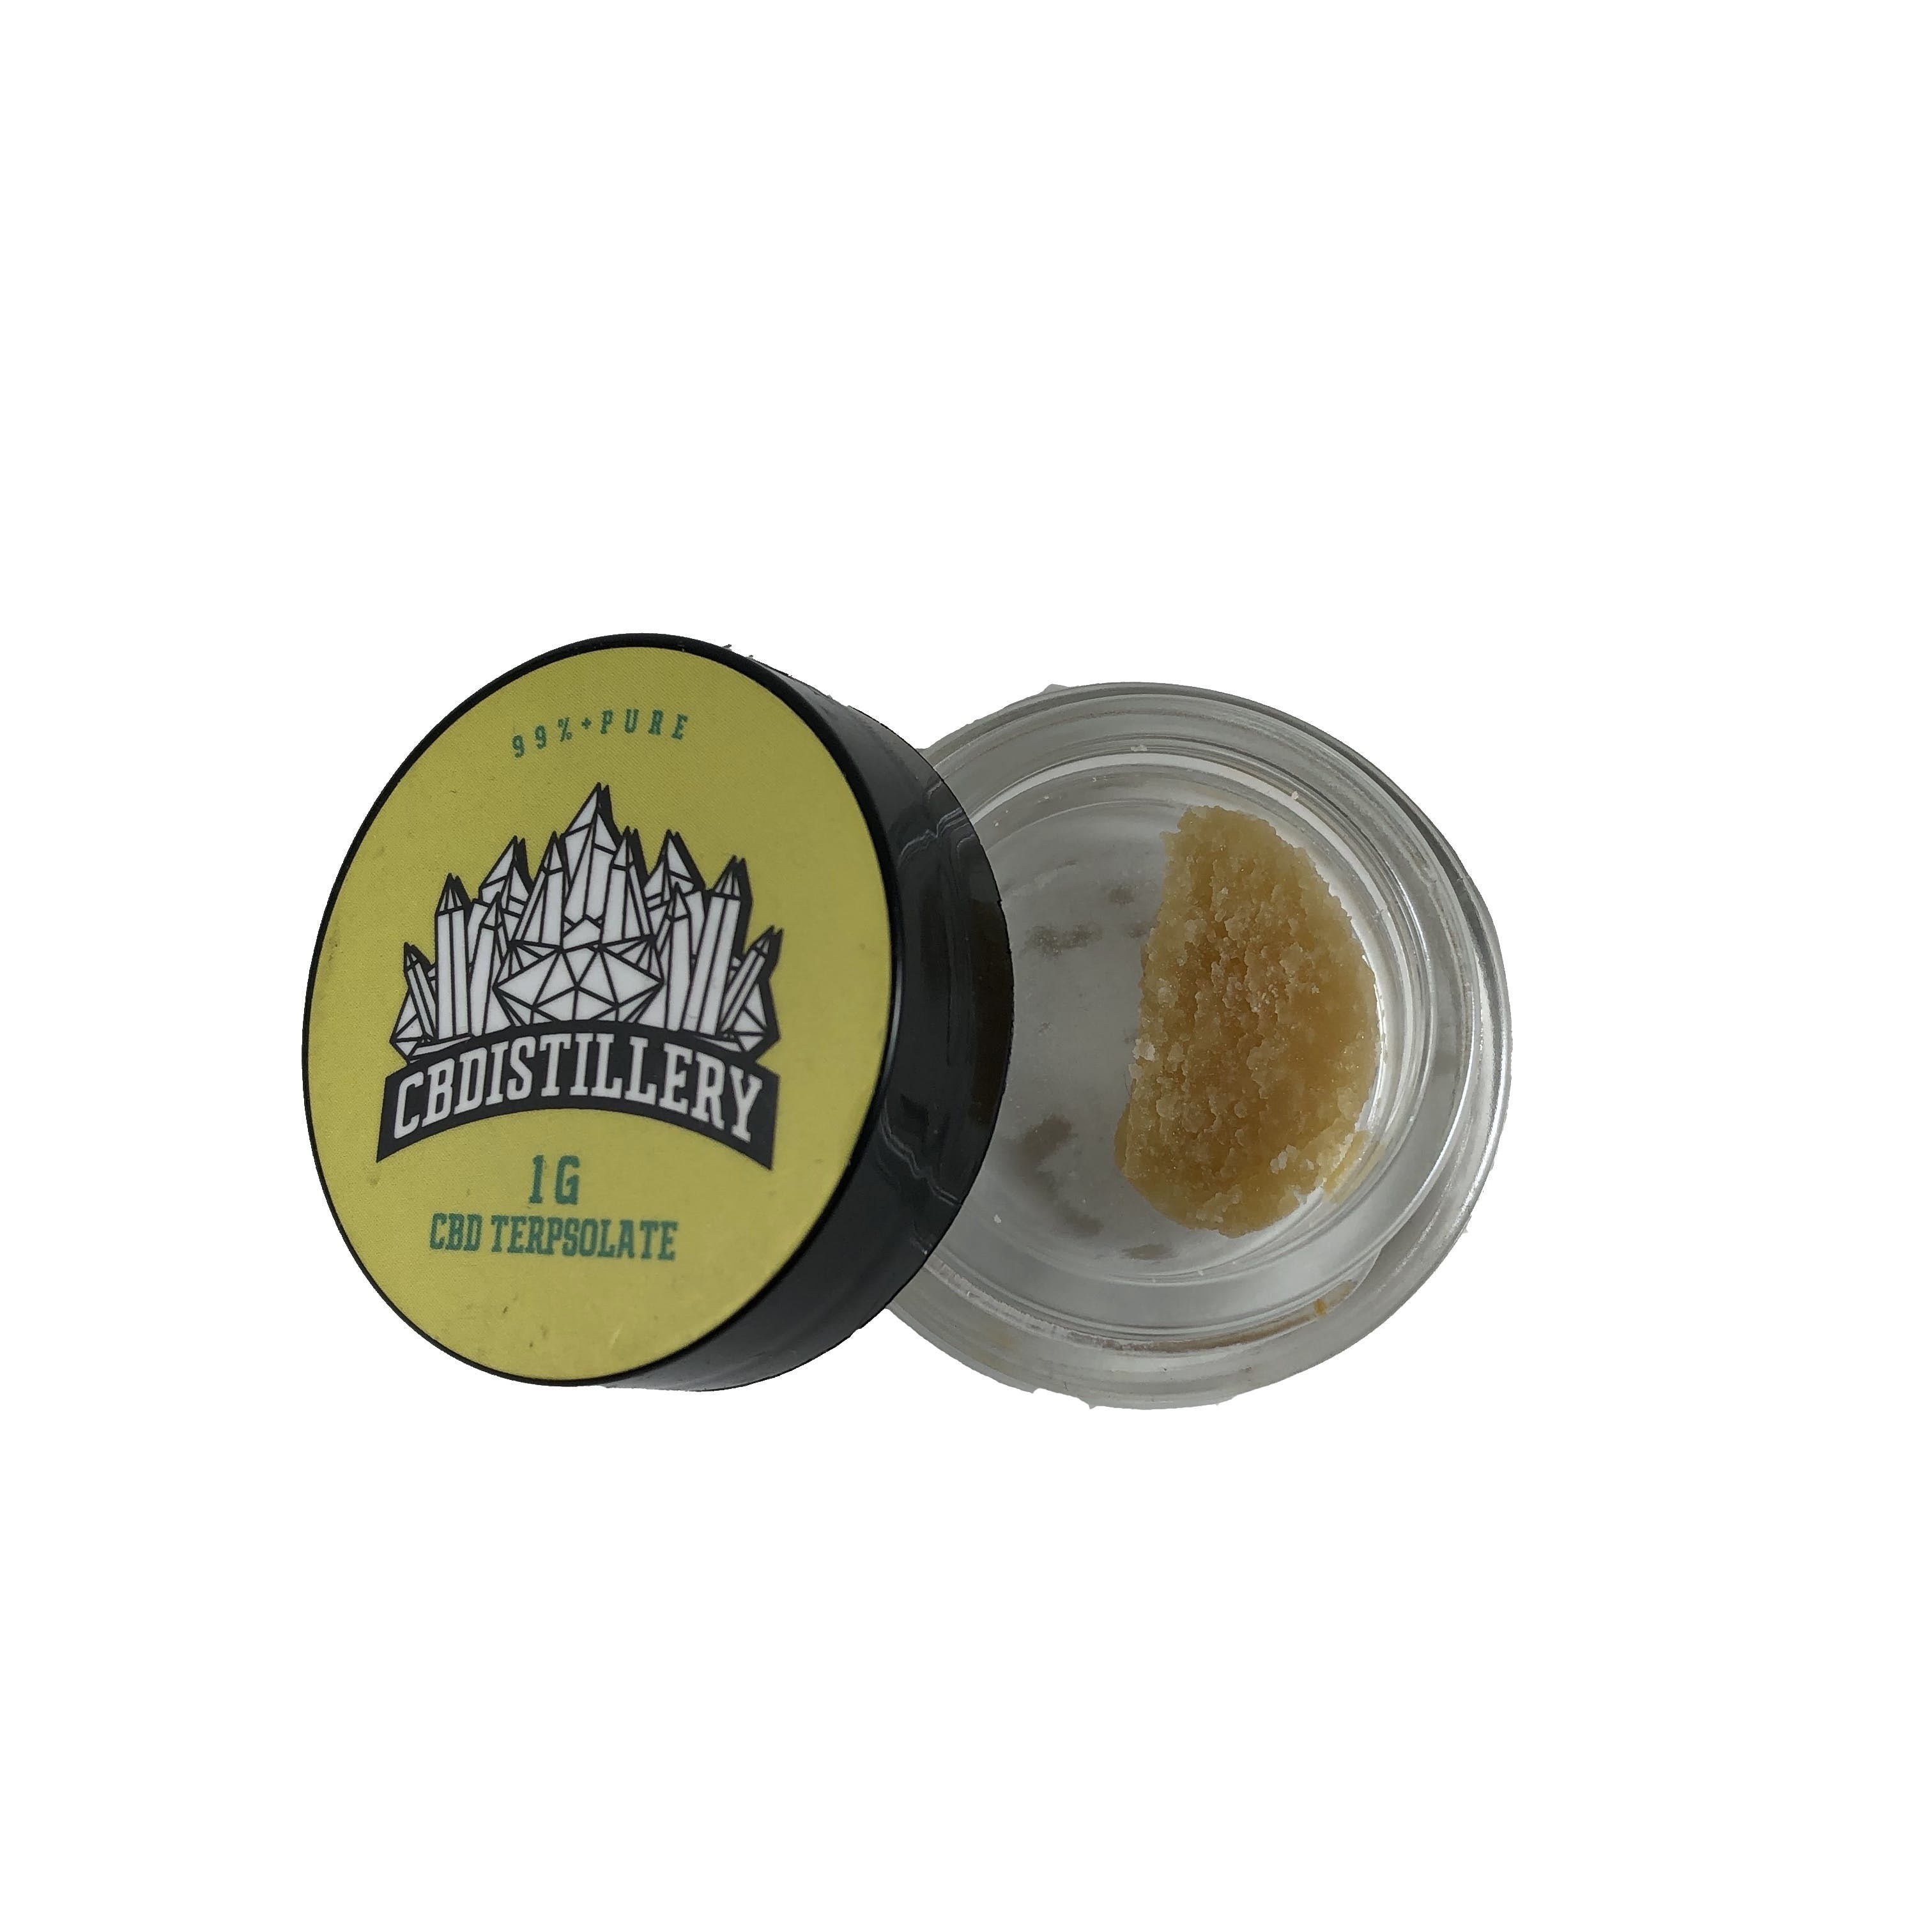 concentrate-1g-botanical-terpsolate-by-cbdistillery